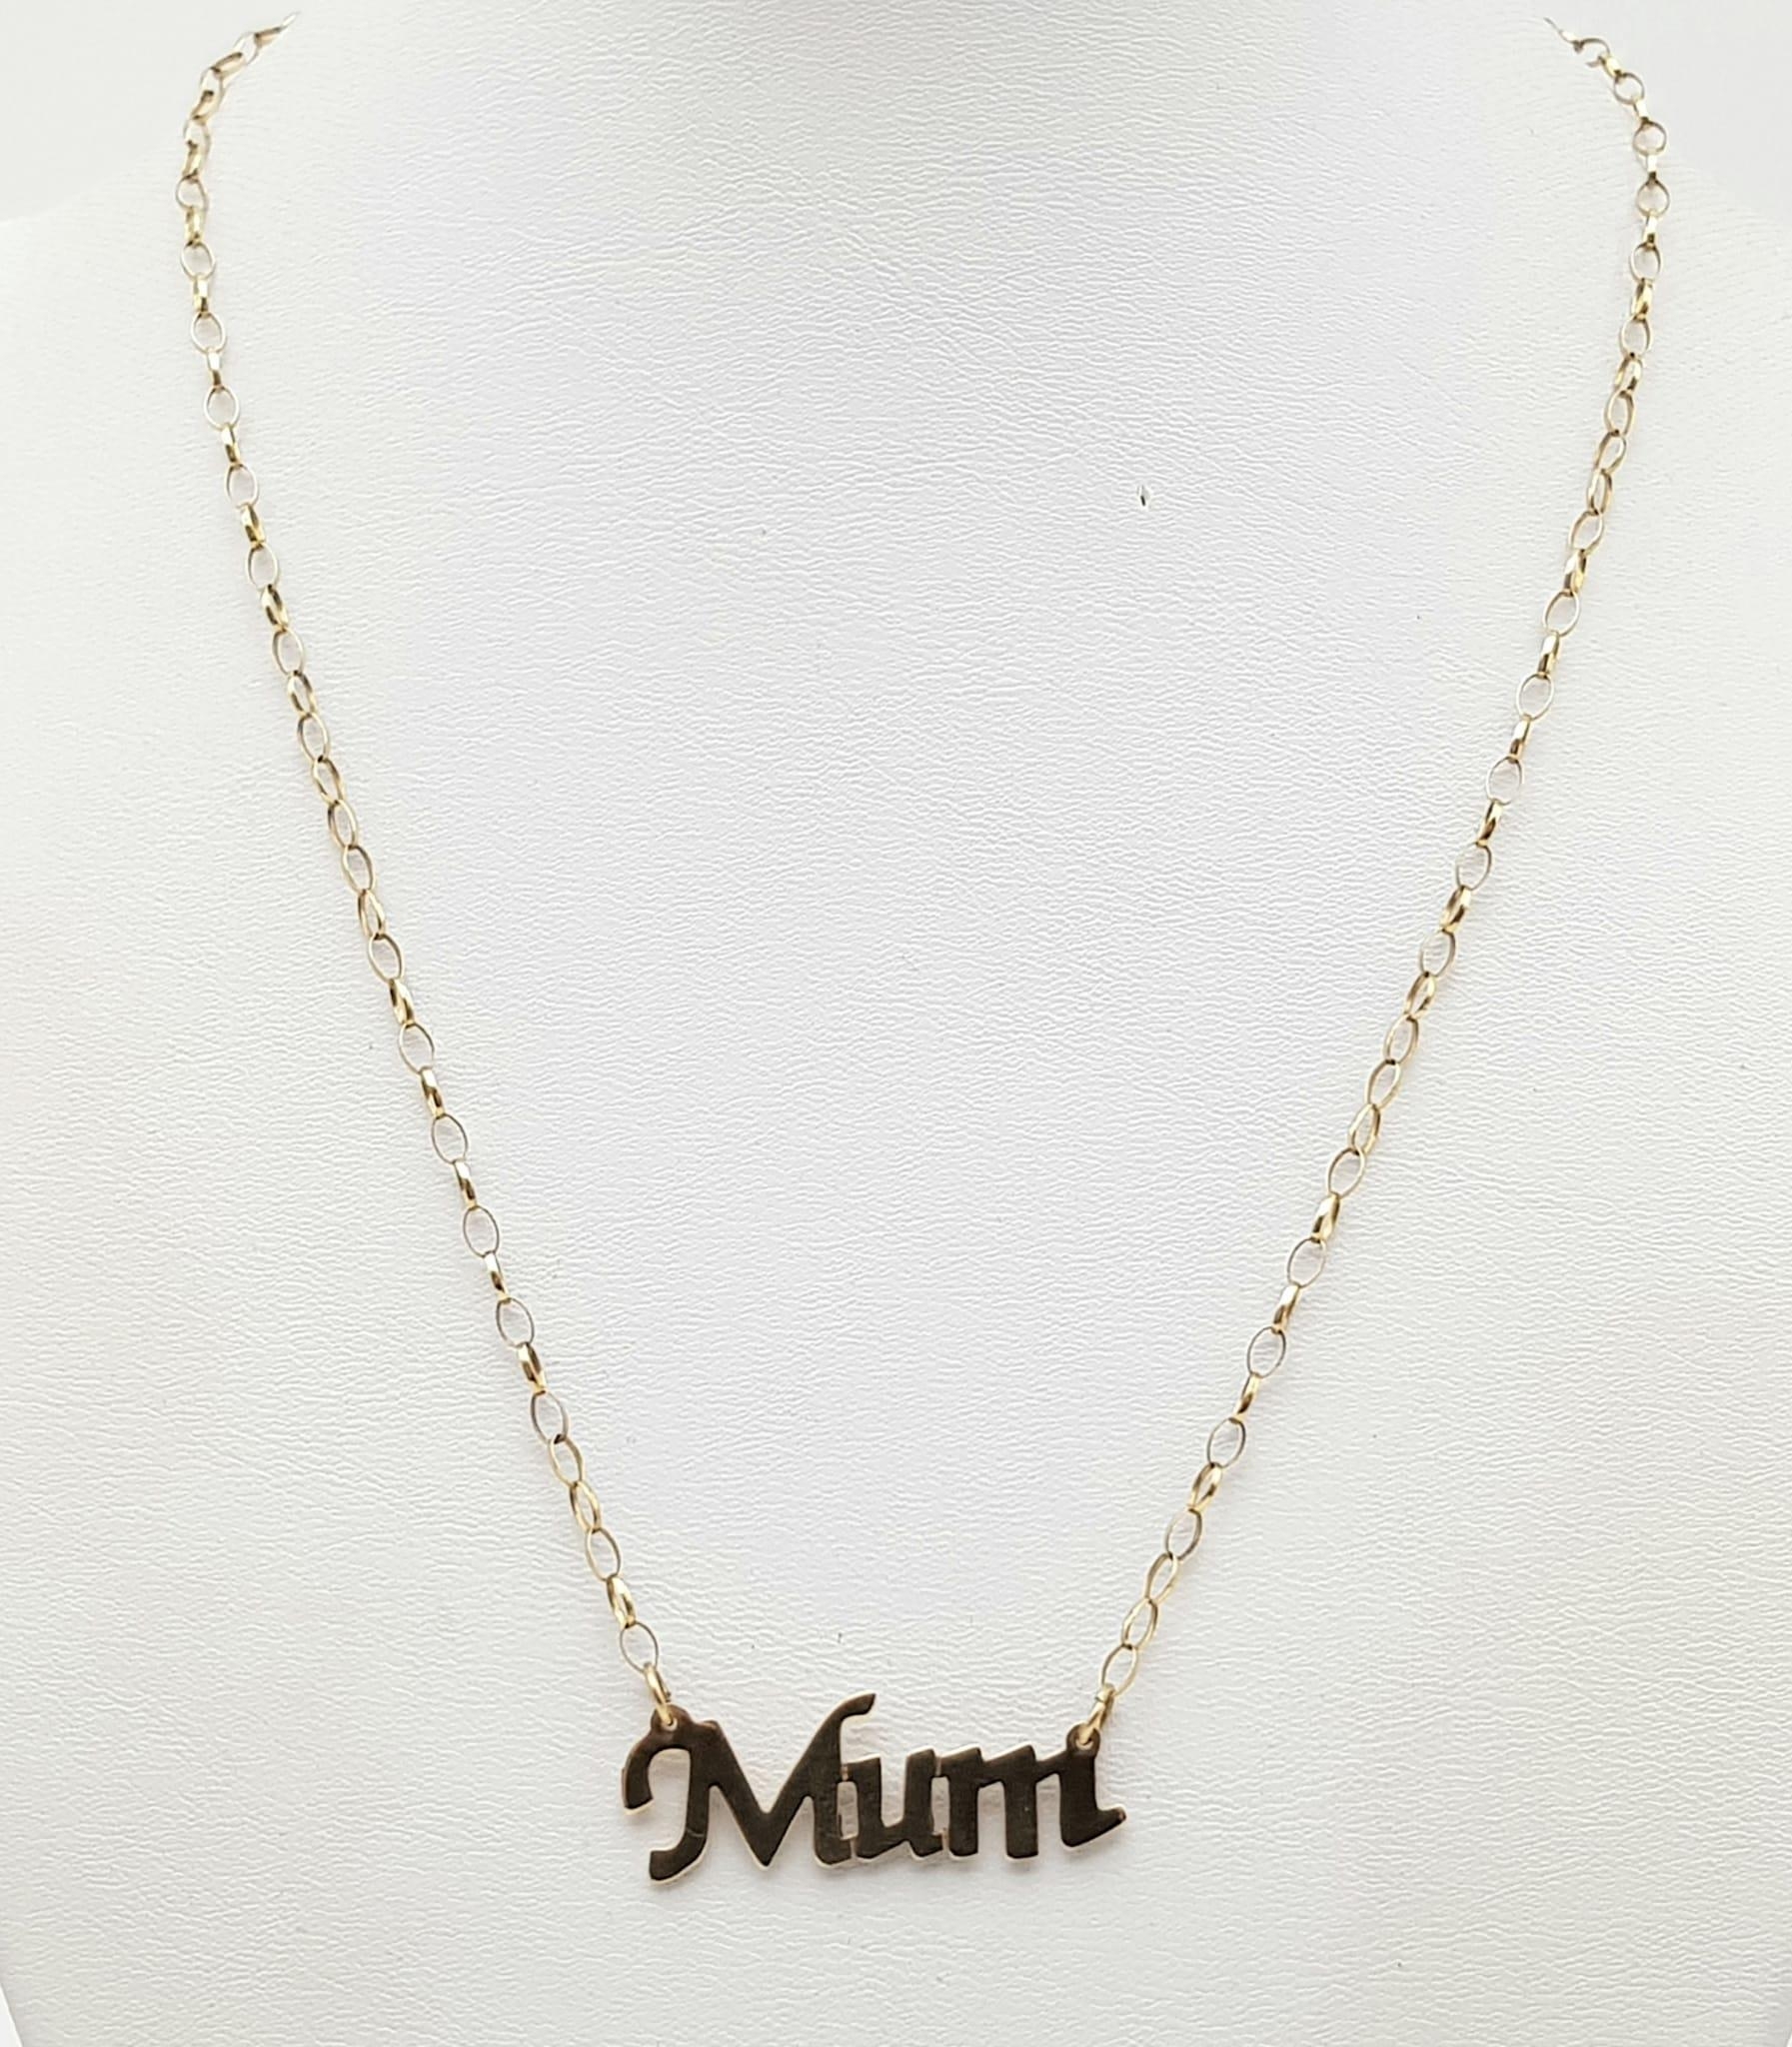 A 9 K yellow gold MUM pendant on chain. Length: 43 cm, weight: 3.4 g. - Image 2 of 3